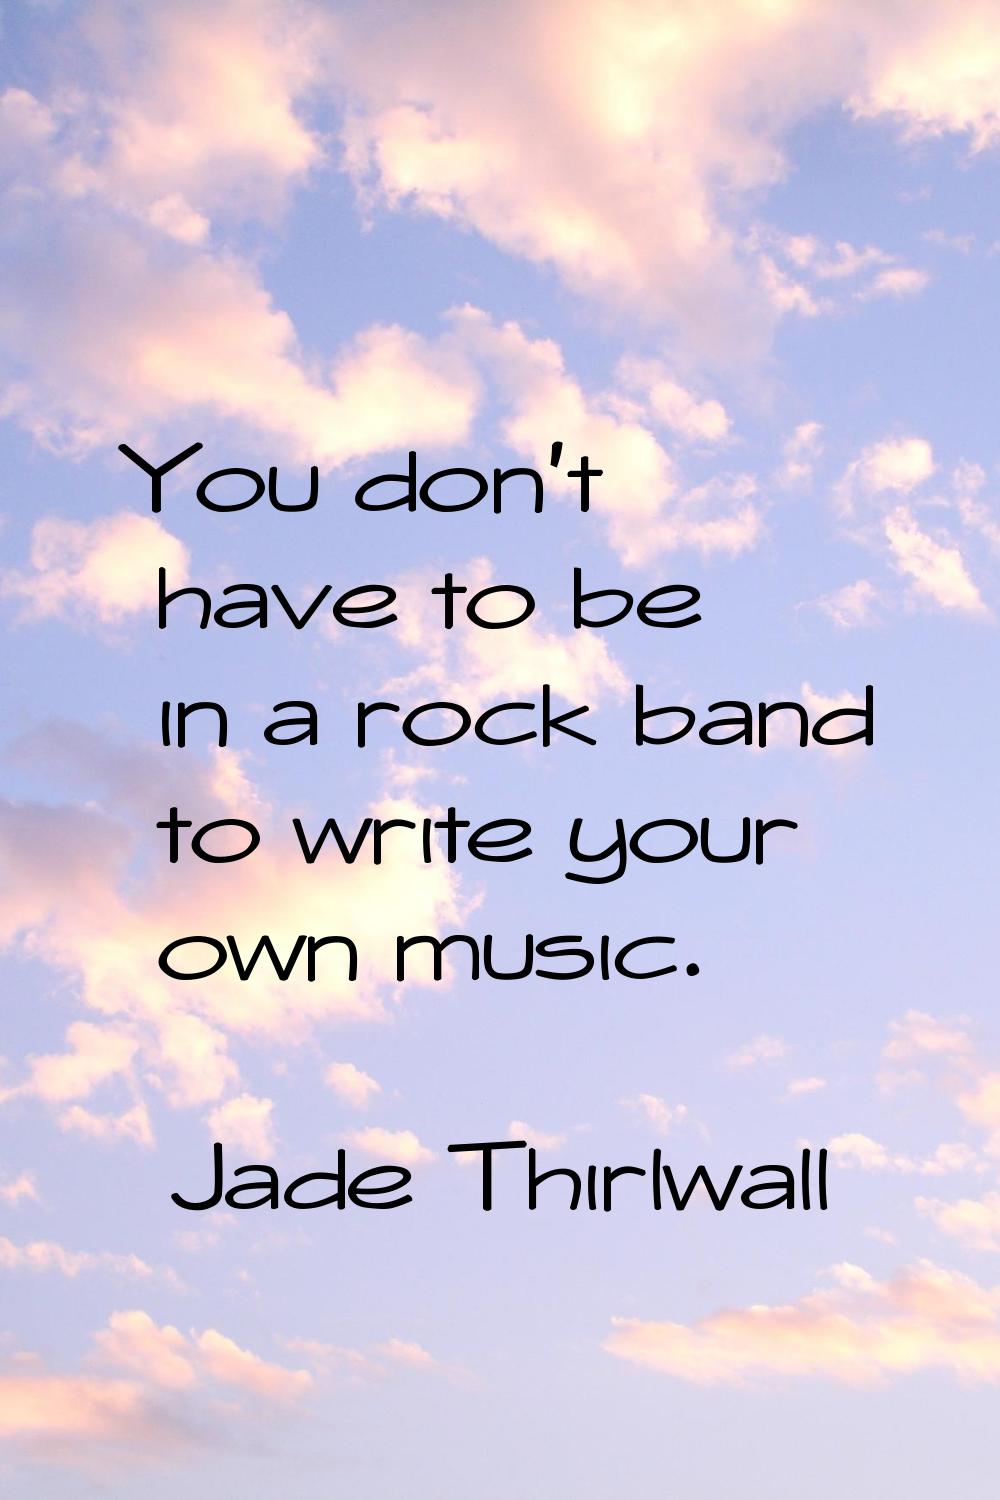 You don't have to be in a rock band to write your own music.